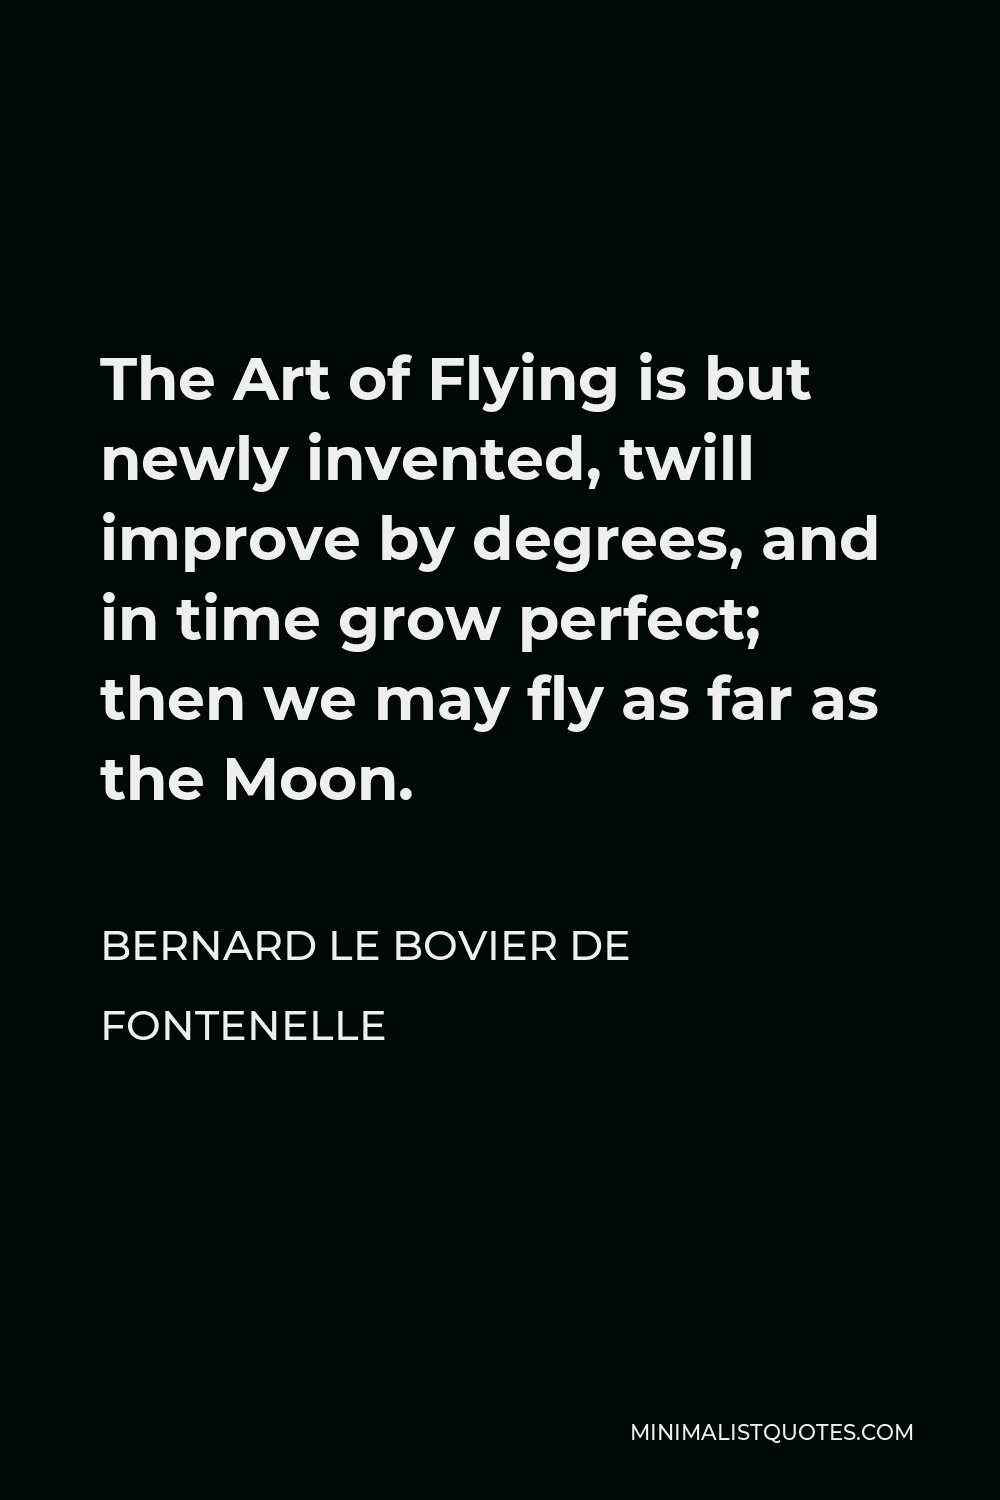 Bernard le Bovier de Fontenelle Quote - The Art of Flying is but newly invented, twill improve by degrees, and in time grow perfect; then we may fly as far as the Moon.